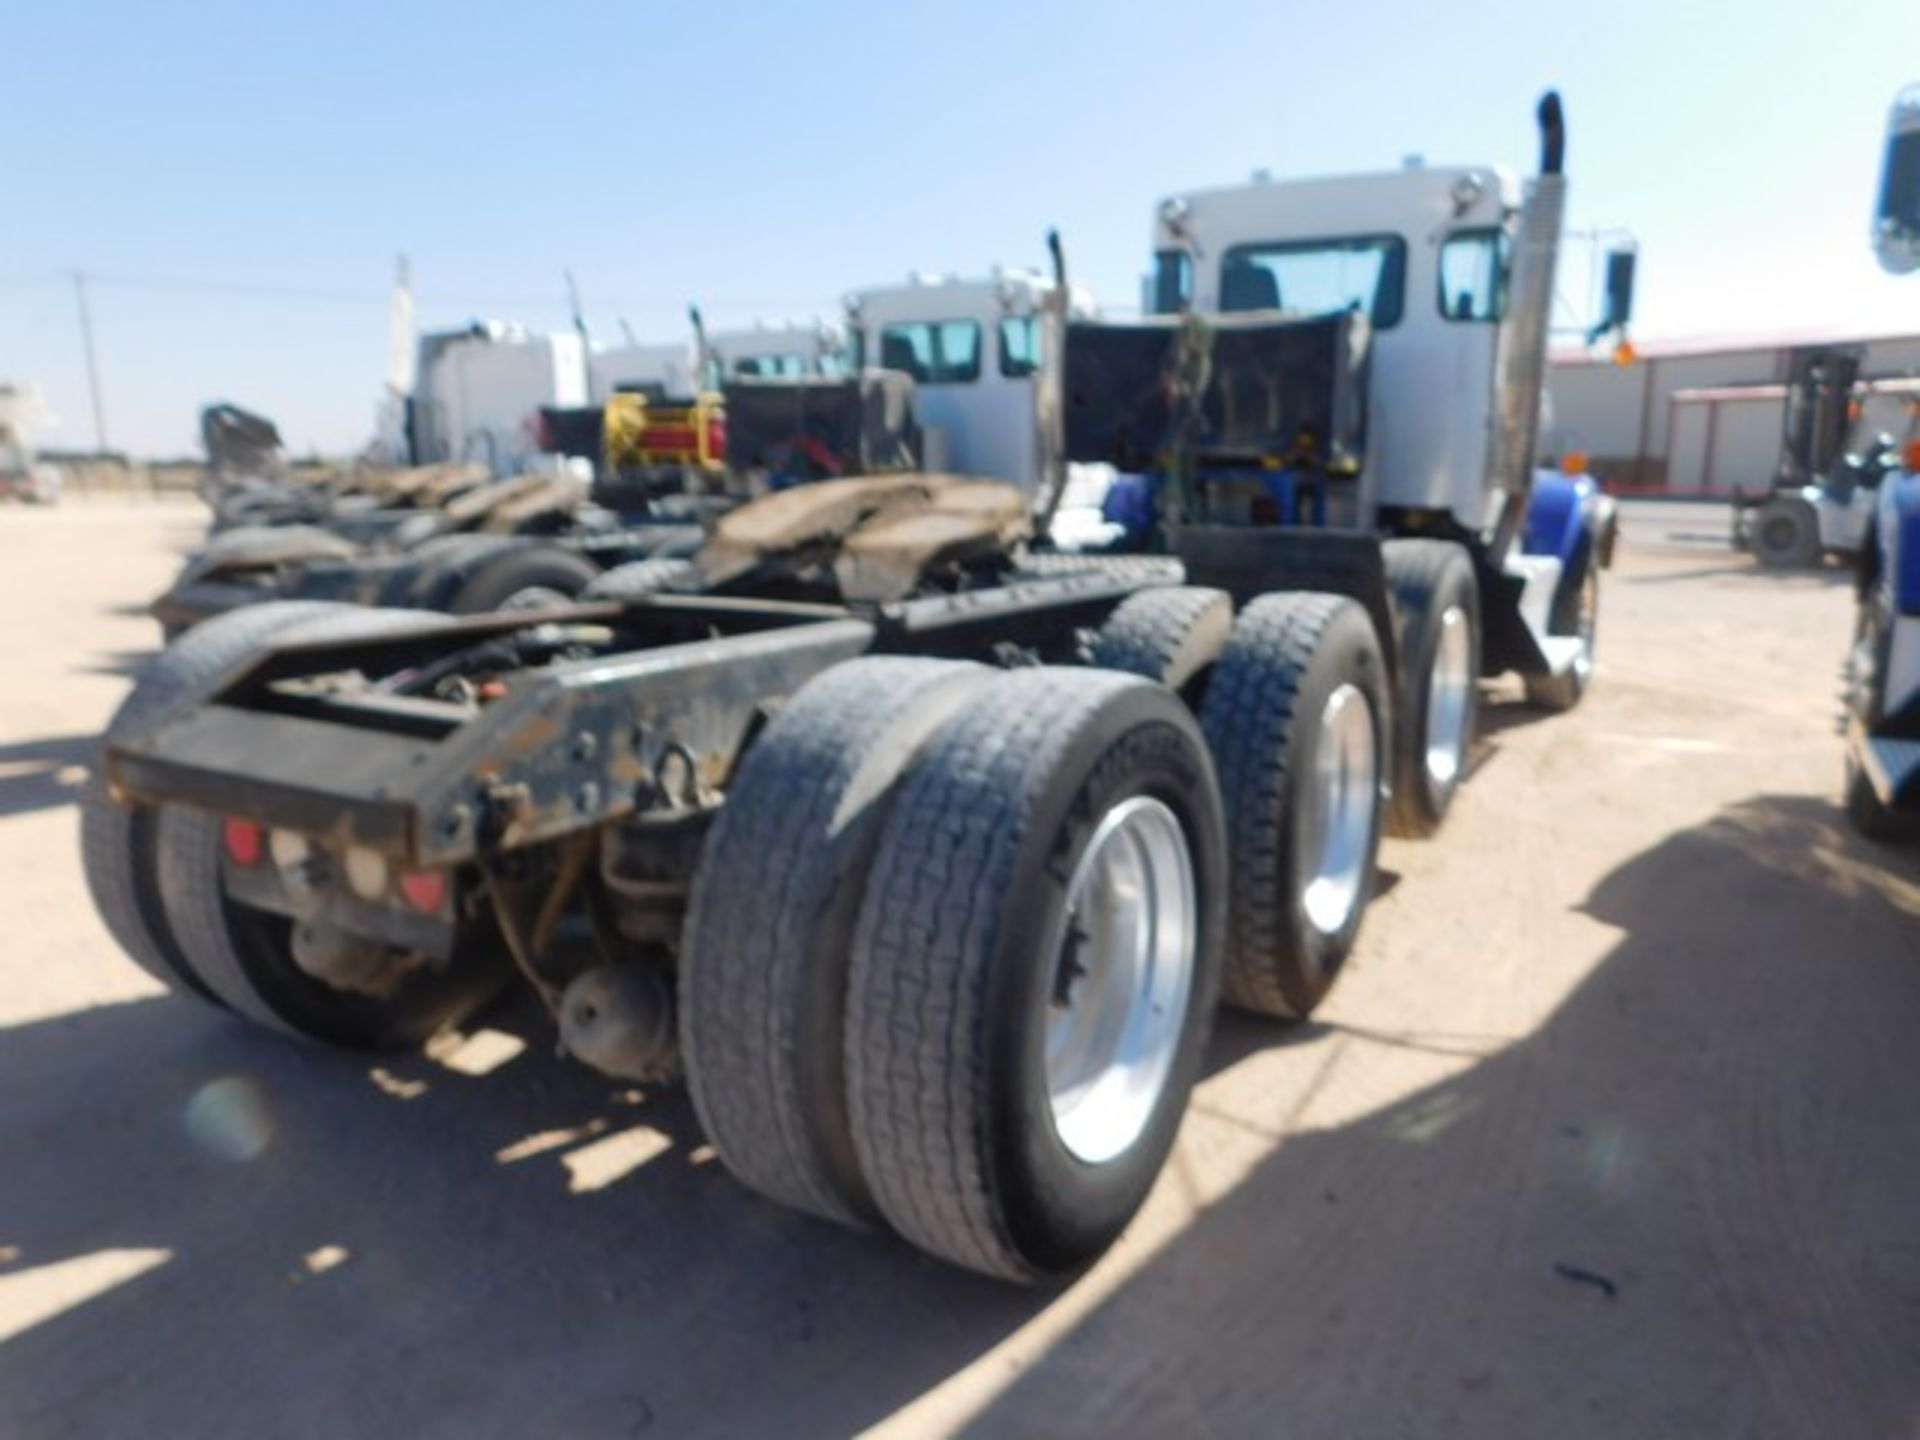 Located in YARD 1 - Midland, TX (2264) (X) 2013 KENWORTH T800 4 AXLE DAY CAB HAUL TRUCK, VIN- - Image 3 of 8